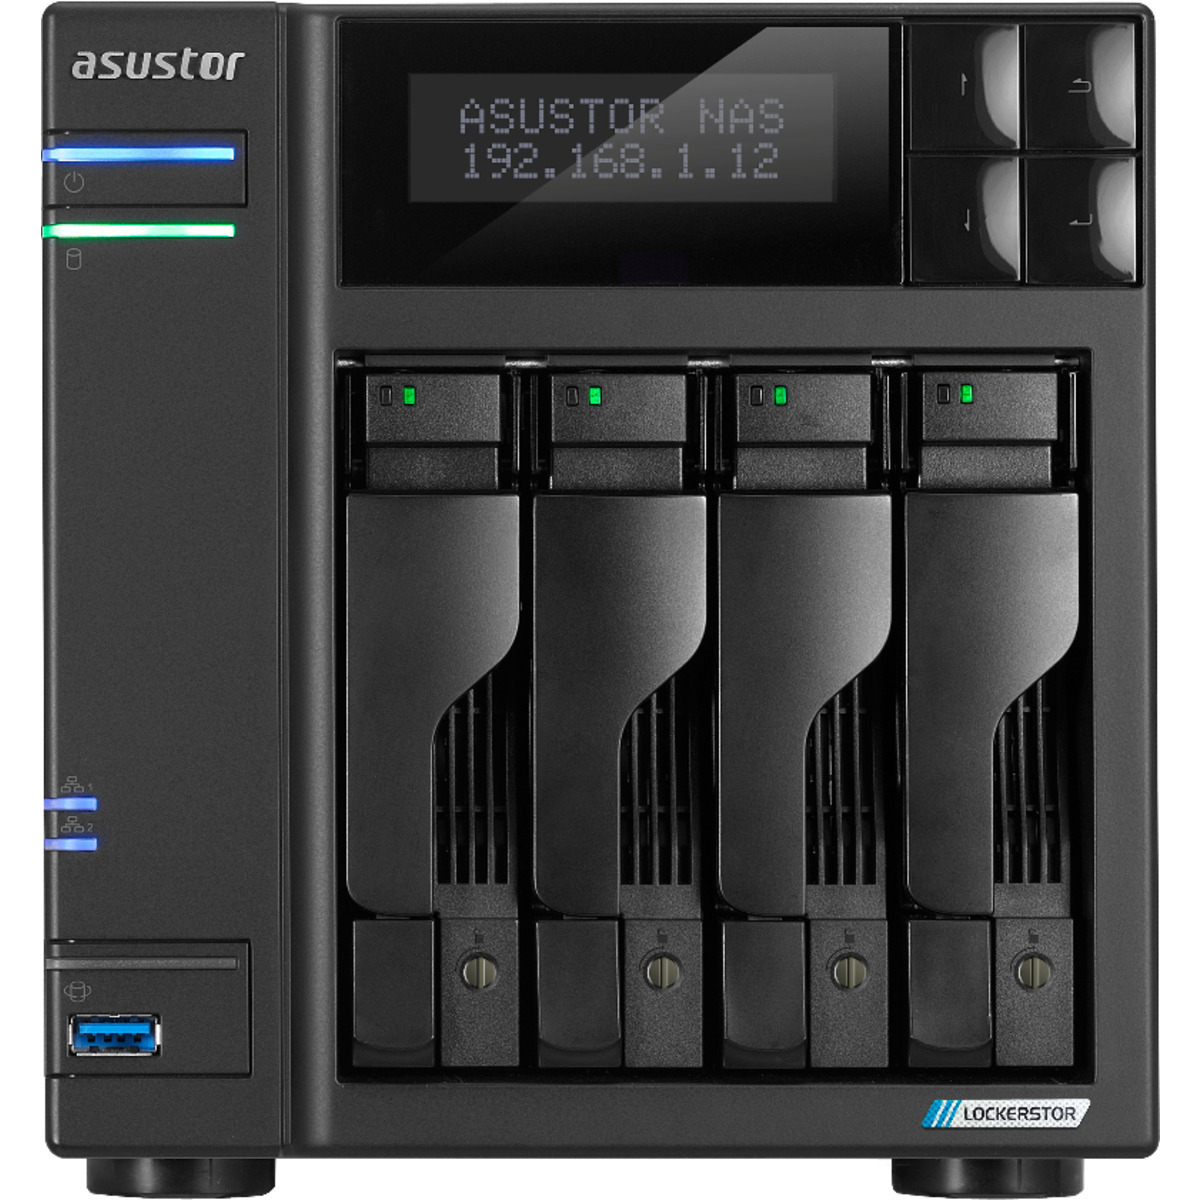 ASUSTOR LOCKERSTOR 4 Gen2 AS6704T 8tb 4-Bay Desktop Multimedia / Power User / Business NAS - Network Attached Storage Device 4x2tb Western Digital Red Pro WD2002FFSX 3.5 7200rpm SATA 6Gb/s HDD NAS Class Drives Installed - Burn-In Tested - FREE RAM UPGRADE LOCKERSTOR 4 Gen2 AS6704T